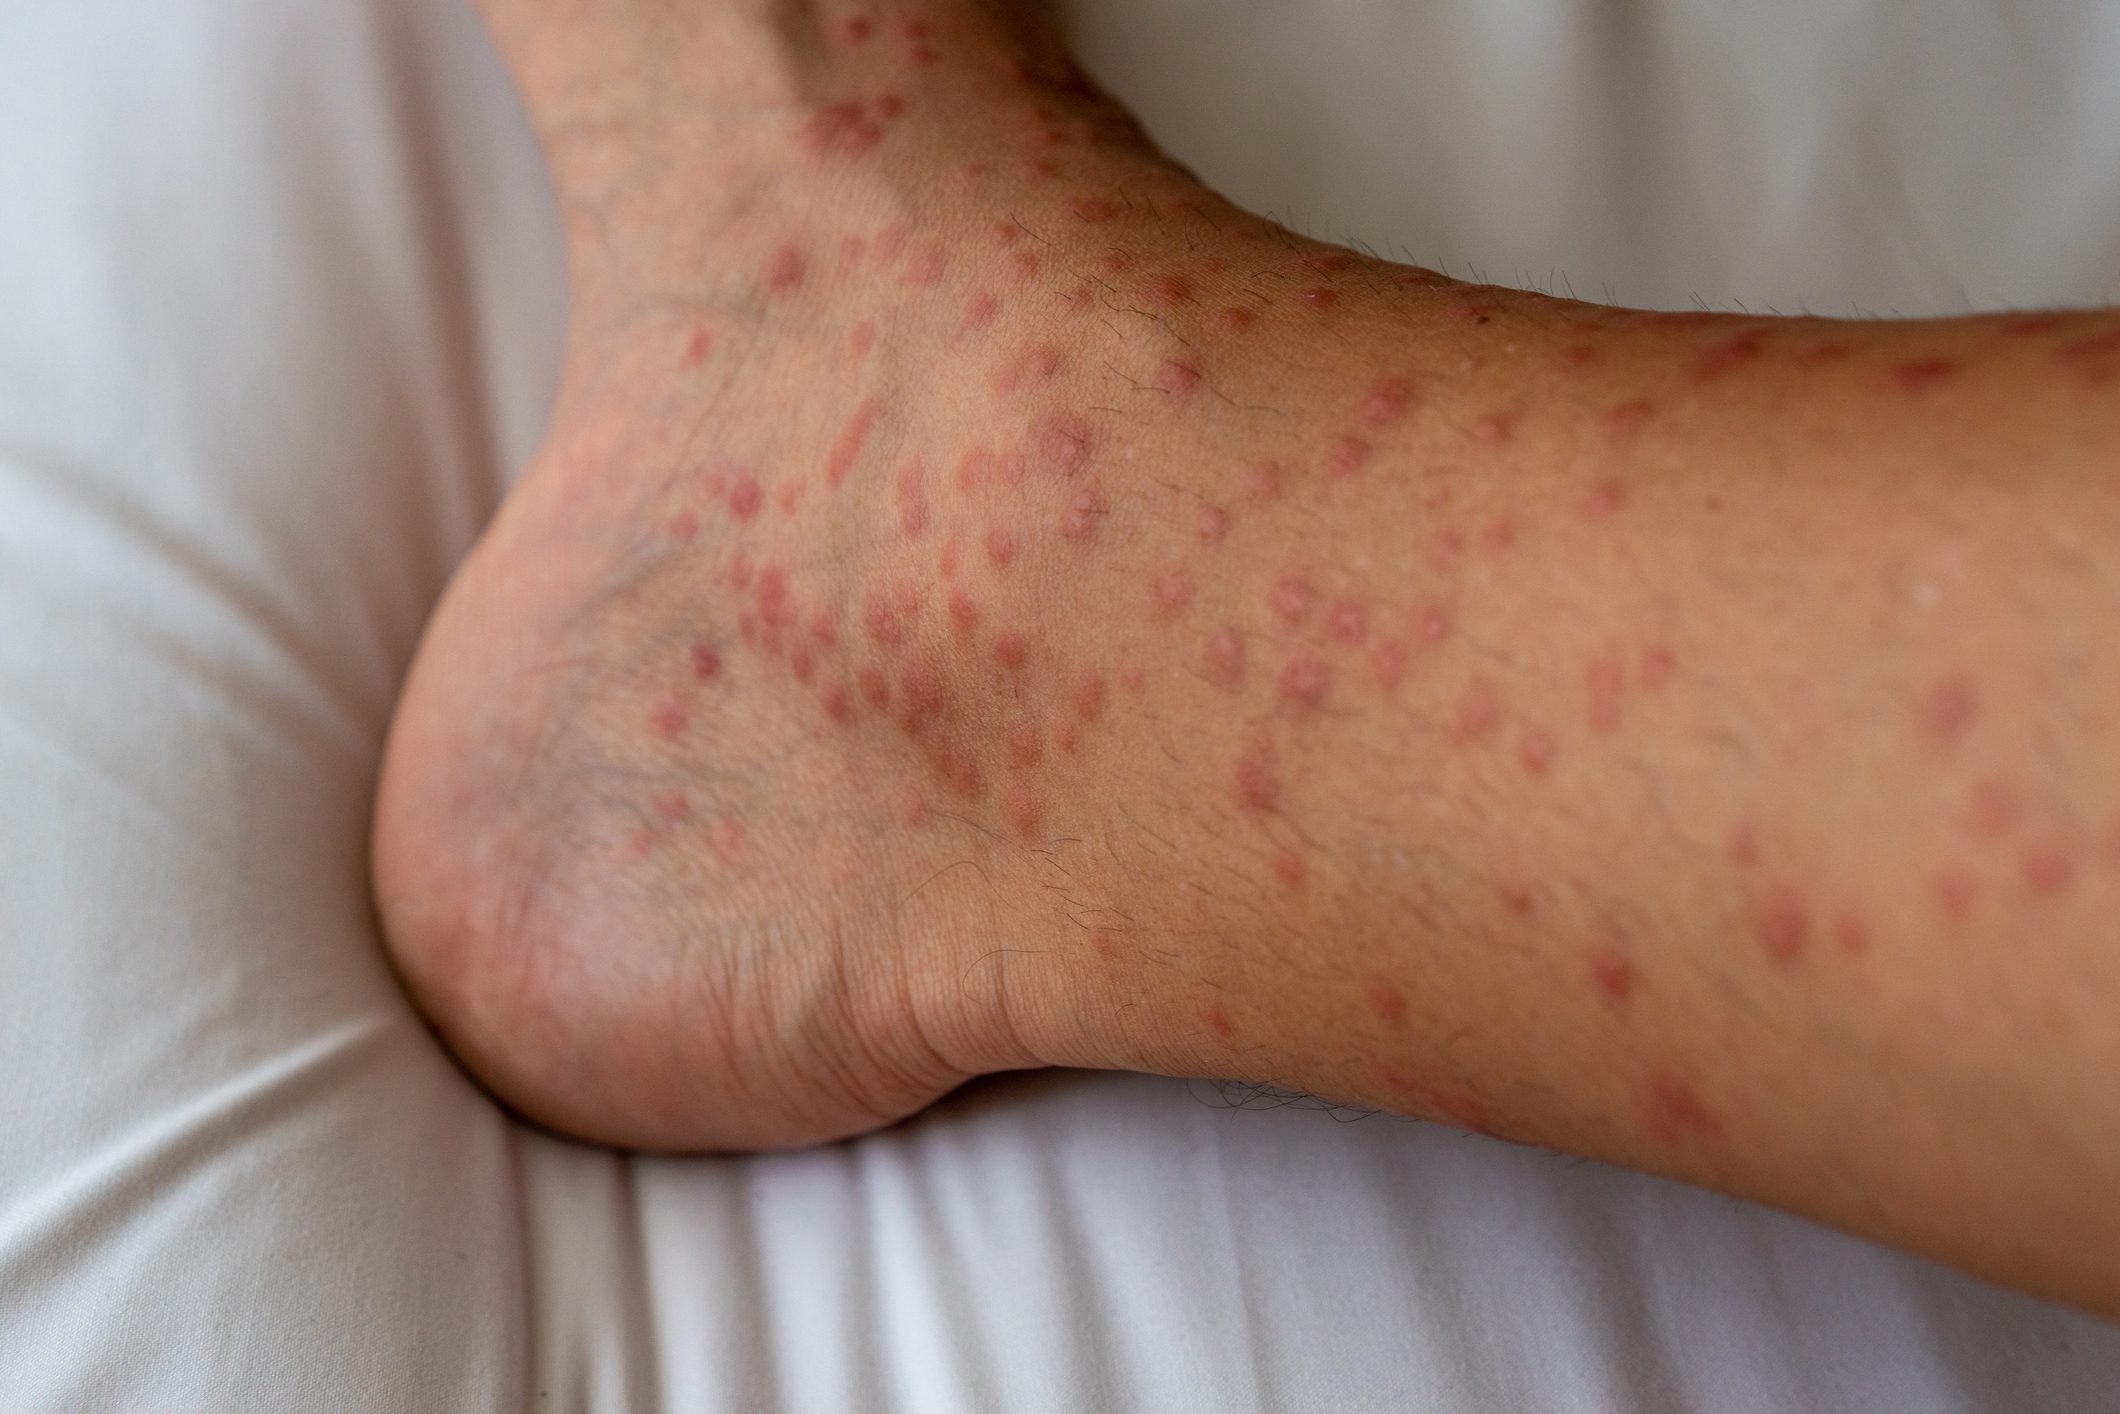 Papular Urticaria A Guide To This Severe Bug Bite Reaction The Healthy